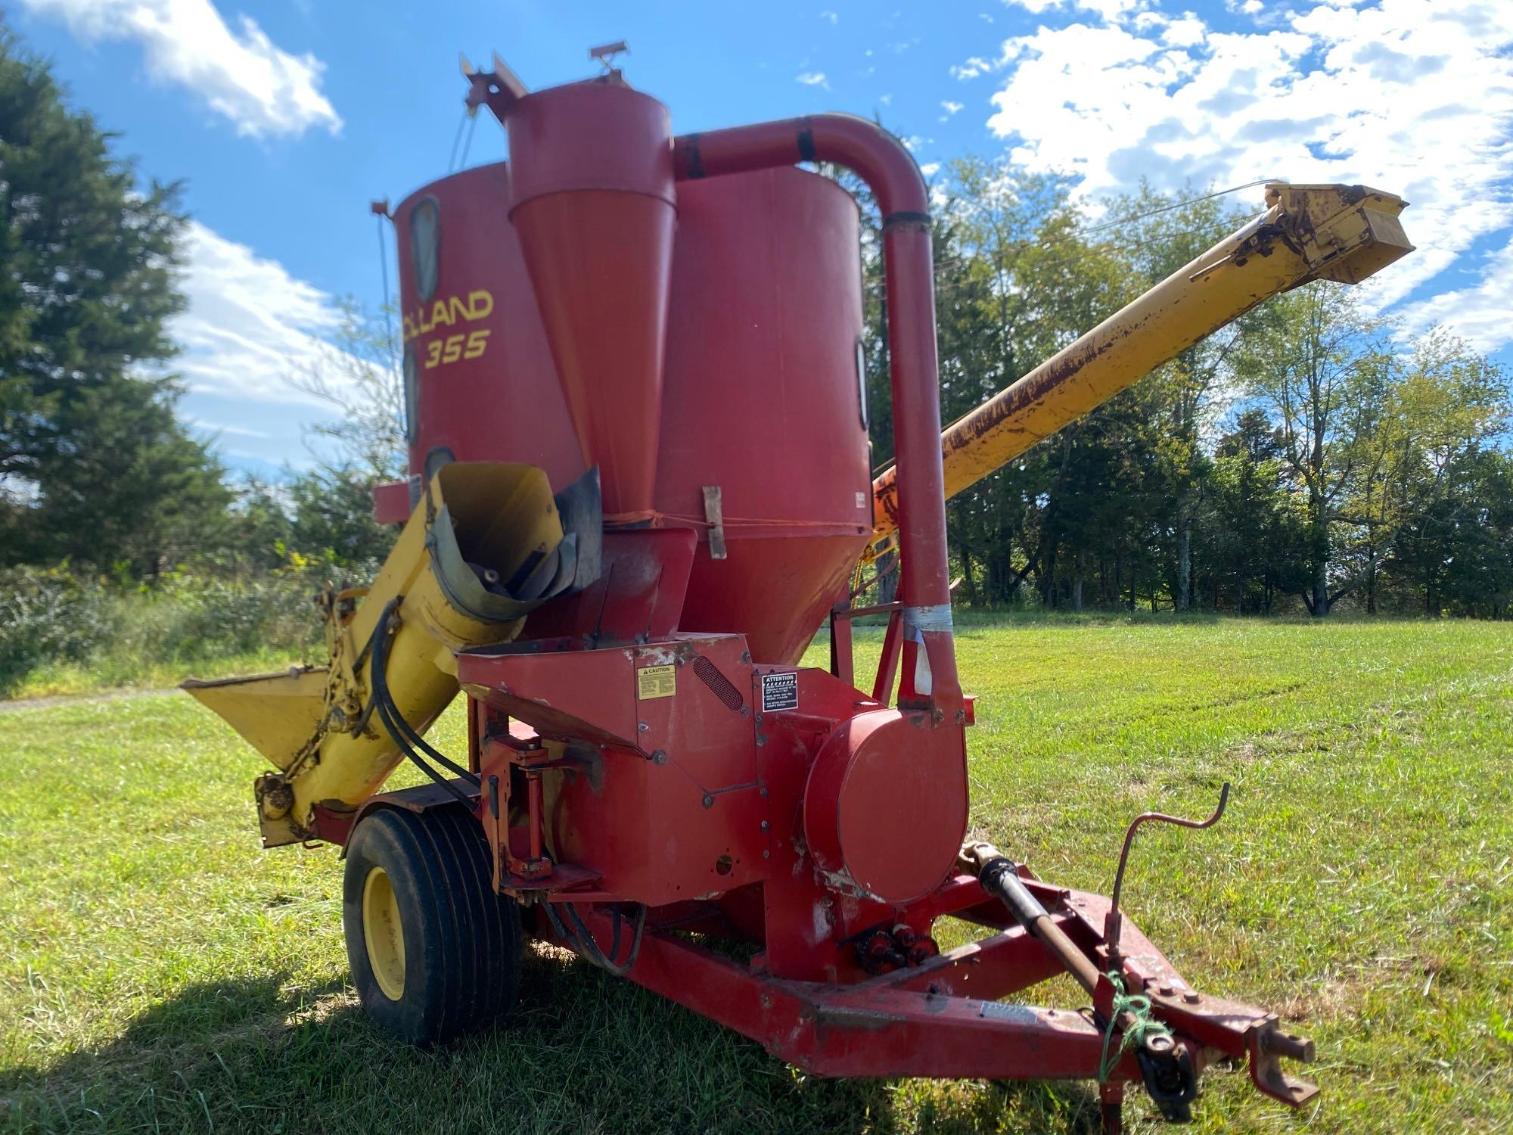 Image for New Holland 355 Feed Grinder, S/N 701393, per seller- works as it should